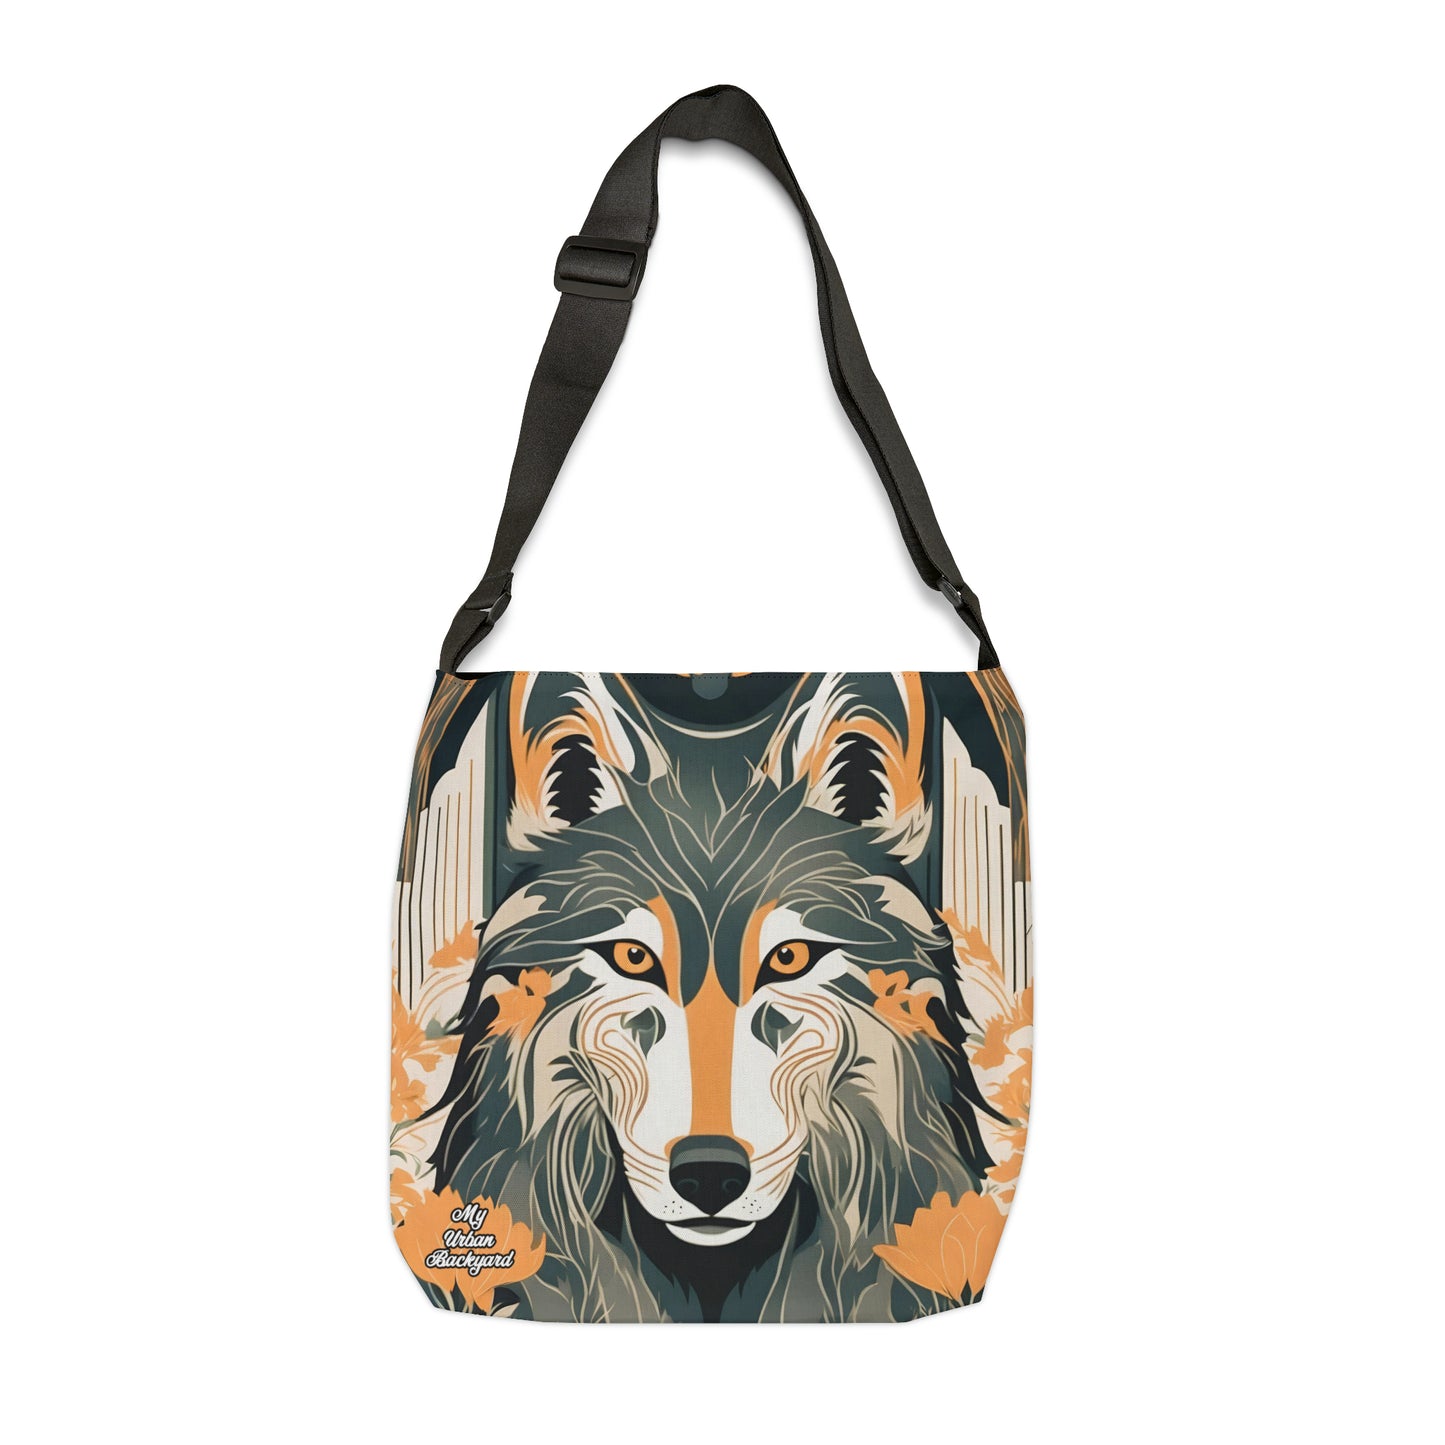 Art Deco Wolf, Tote Bag with Adjustable Strap - Trendy and Versatile